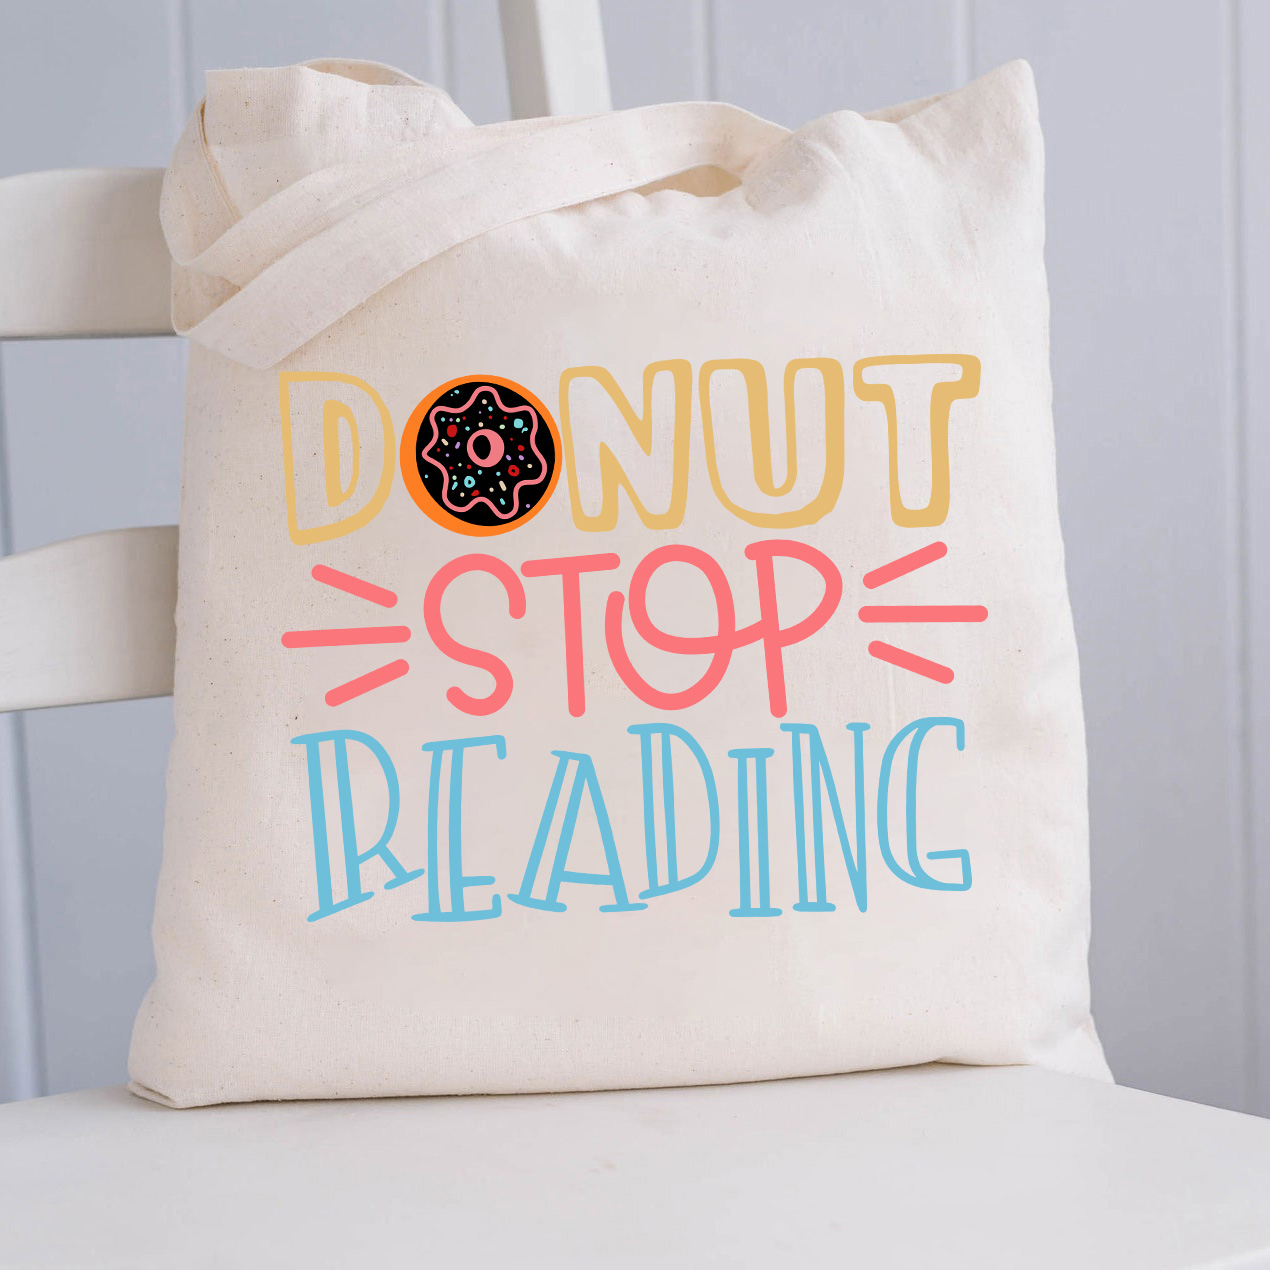 Dount Stop Reading Tote Bag